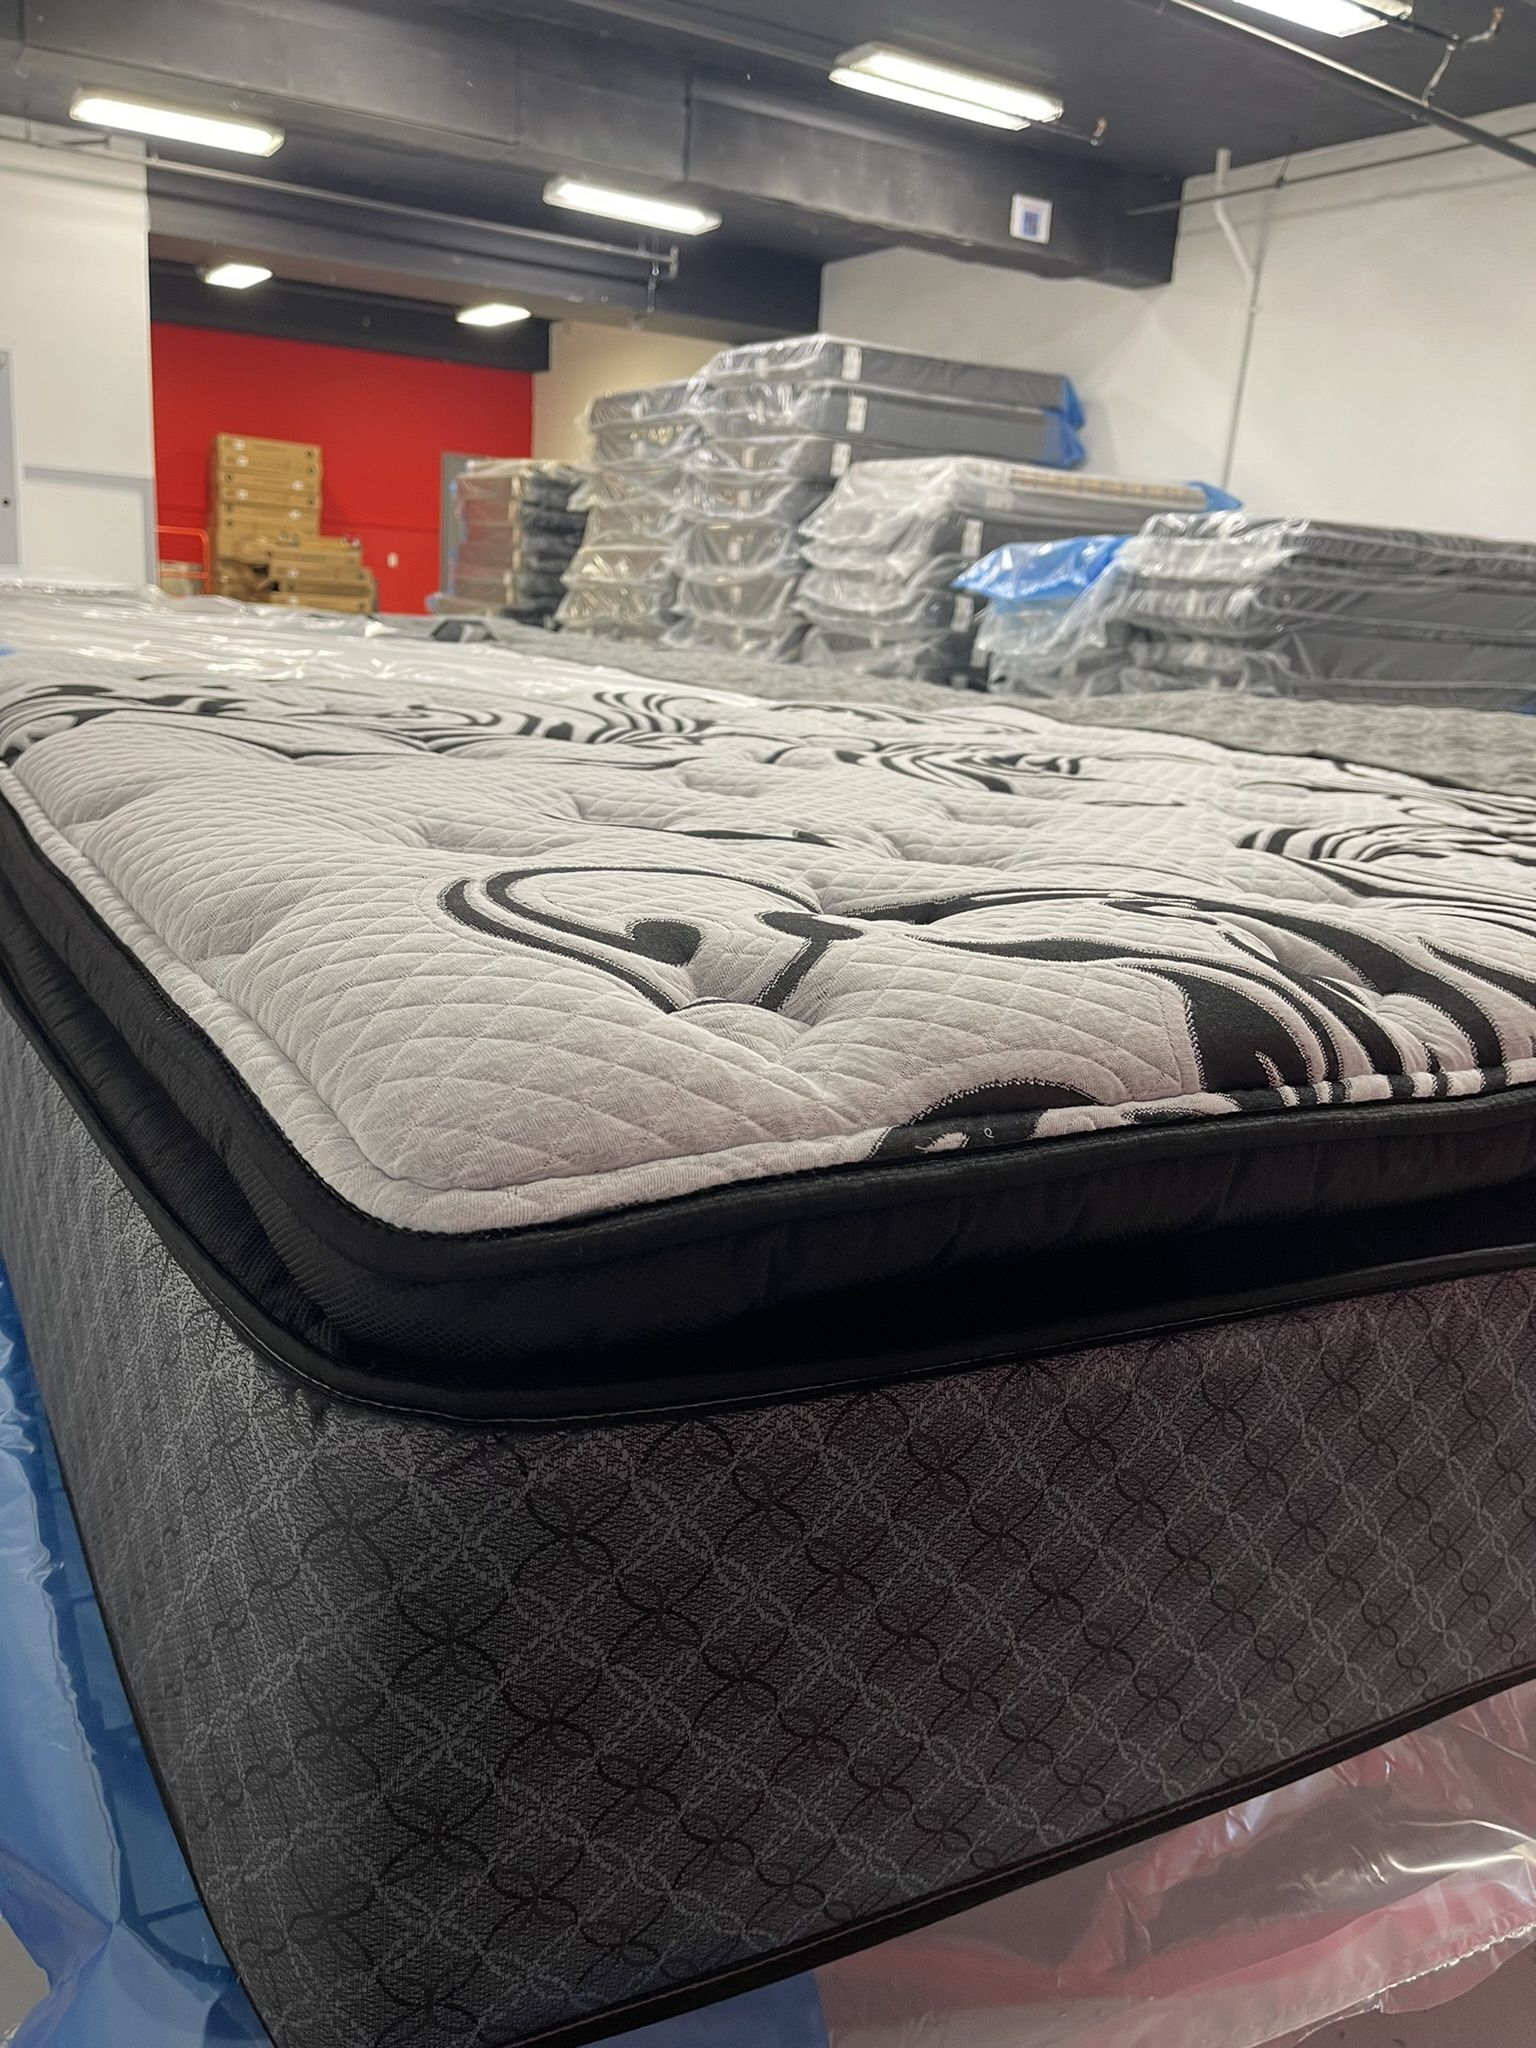 🛌 Brand New Beds 😃 Available Today!! Mattress Sale!